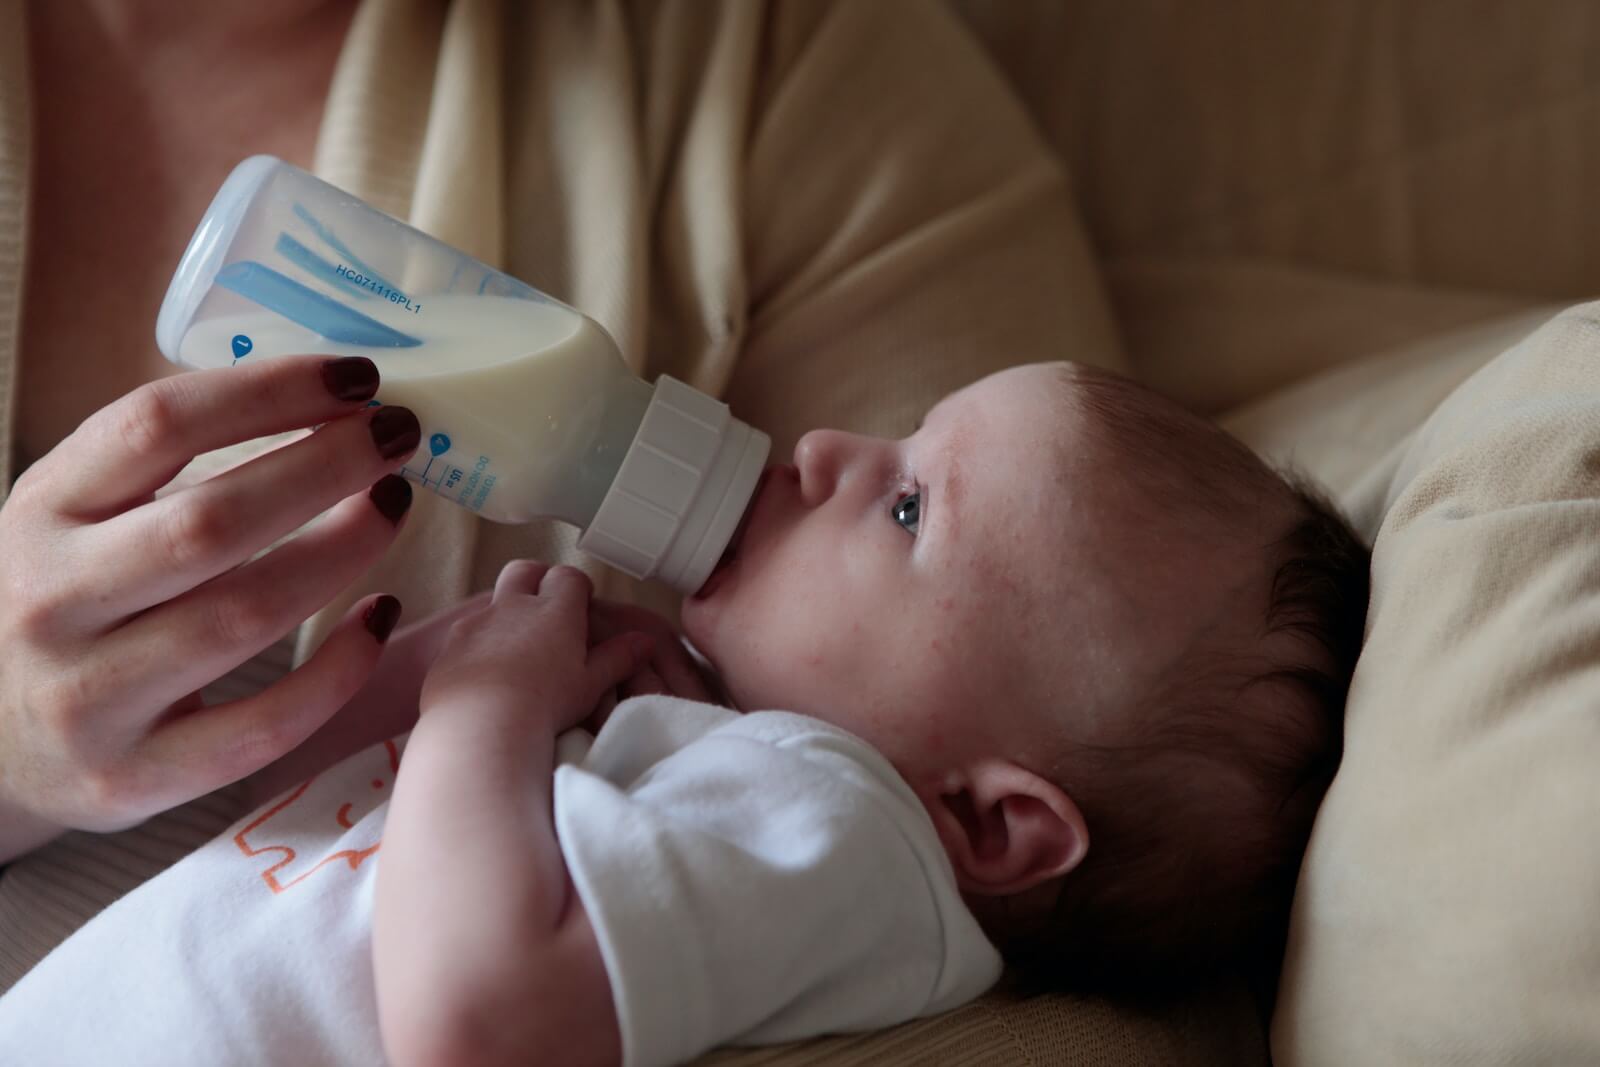 baby drinking from bottle in person's arms